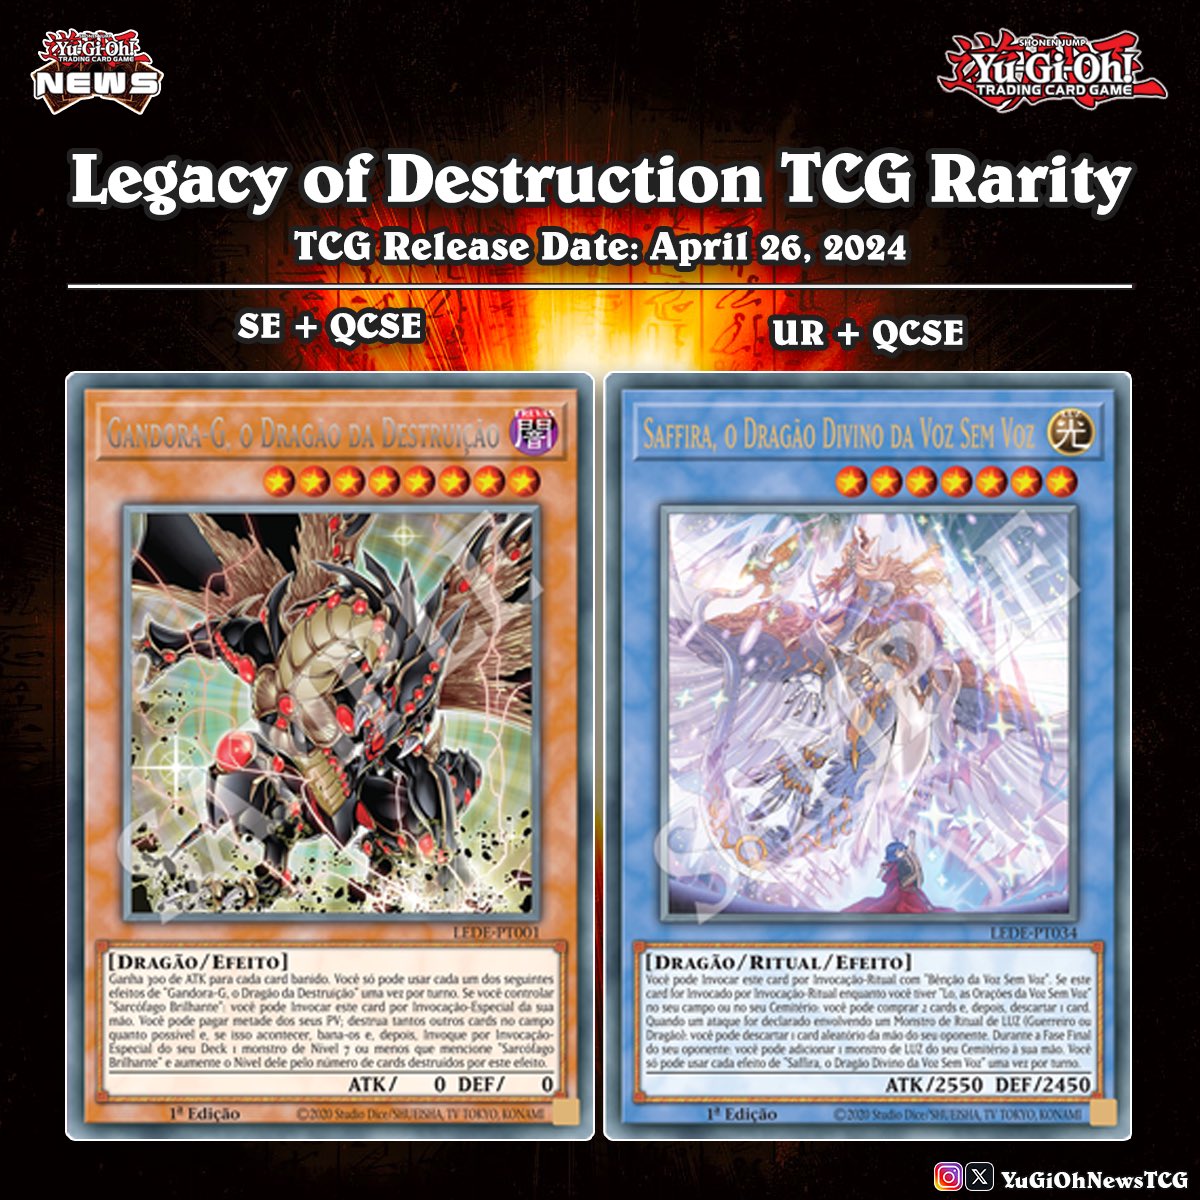 ❰𝗟𝗲𝗴𝗮𝗰𝘆 𝗼𝗳 𝗗𝗲𝘀𝘁𝗿𝘂𝗰𝘁𝗶𝗼𝗻❱ The YCS event in Brazil, set for May 4th - 5th, 2024, will feature the 'ATTACK OF THE GIANT CARD!!' prize with two 'Legacy of Destruction' cards, also revealing the rarity of two new cards from the set❗️✨ #遊戯王 #YuGiOh #유희왕